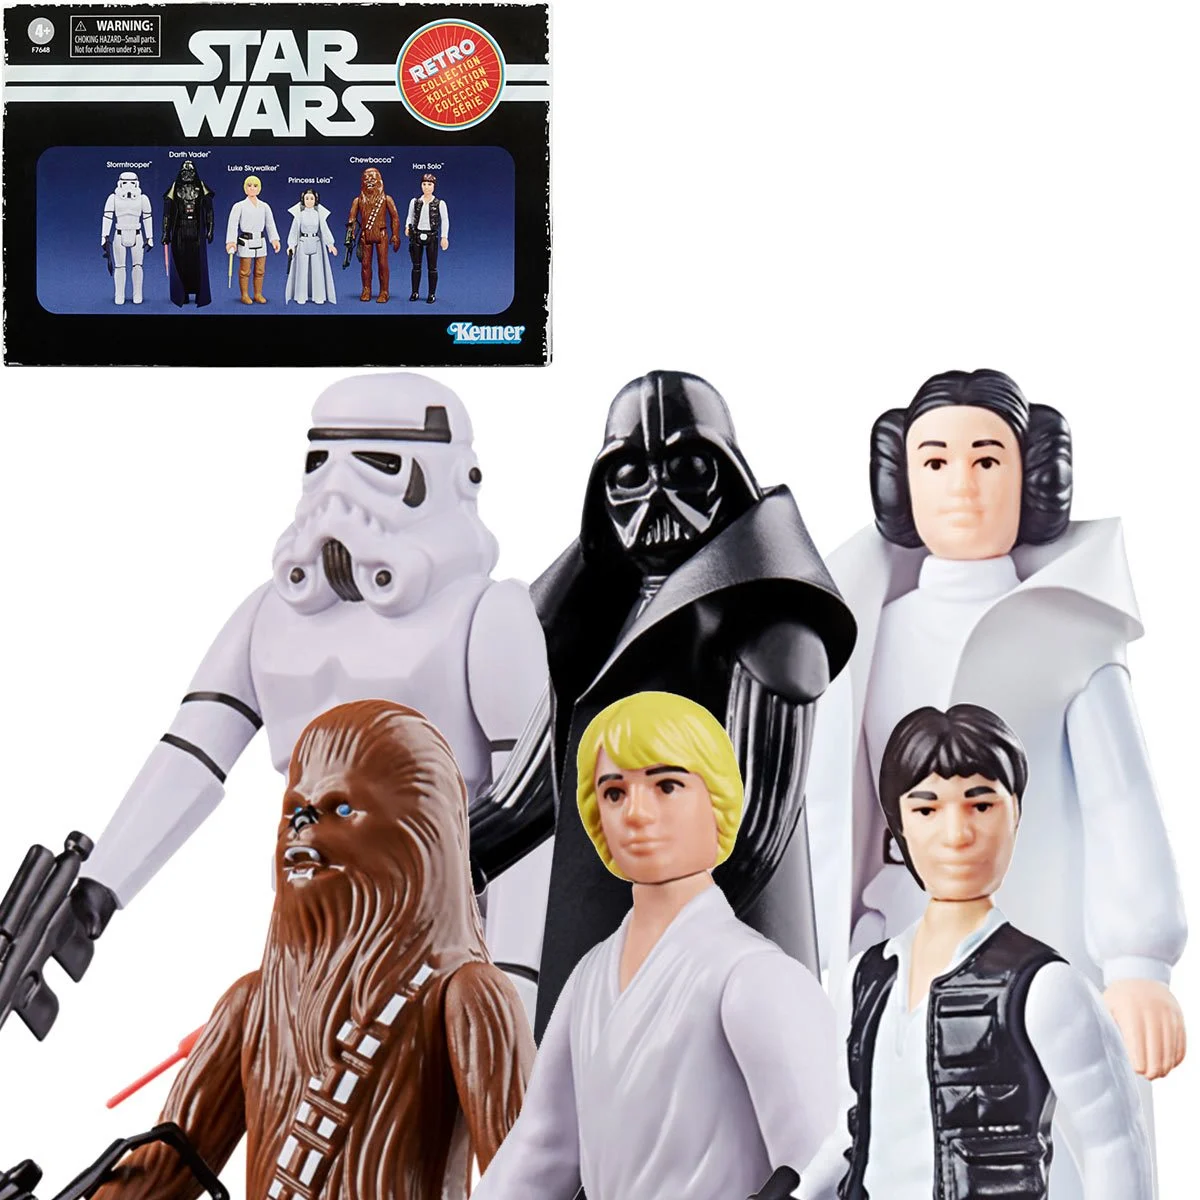 Star Wars The Retro Collection Action Figures Set of 6 HSF7648 5010994167295